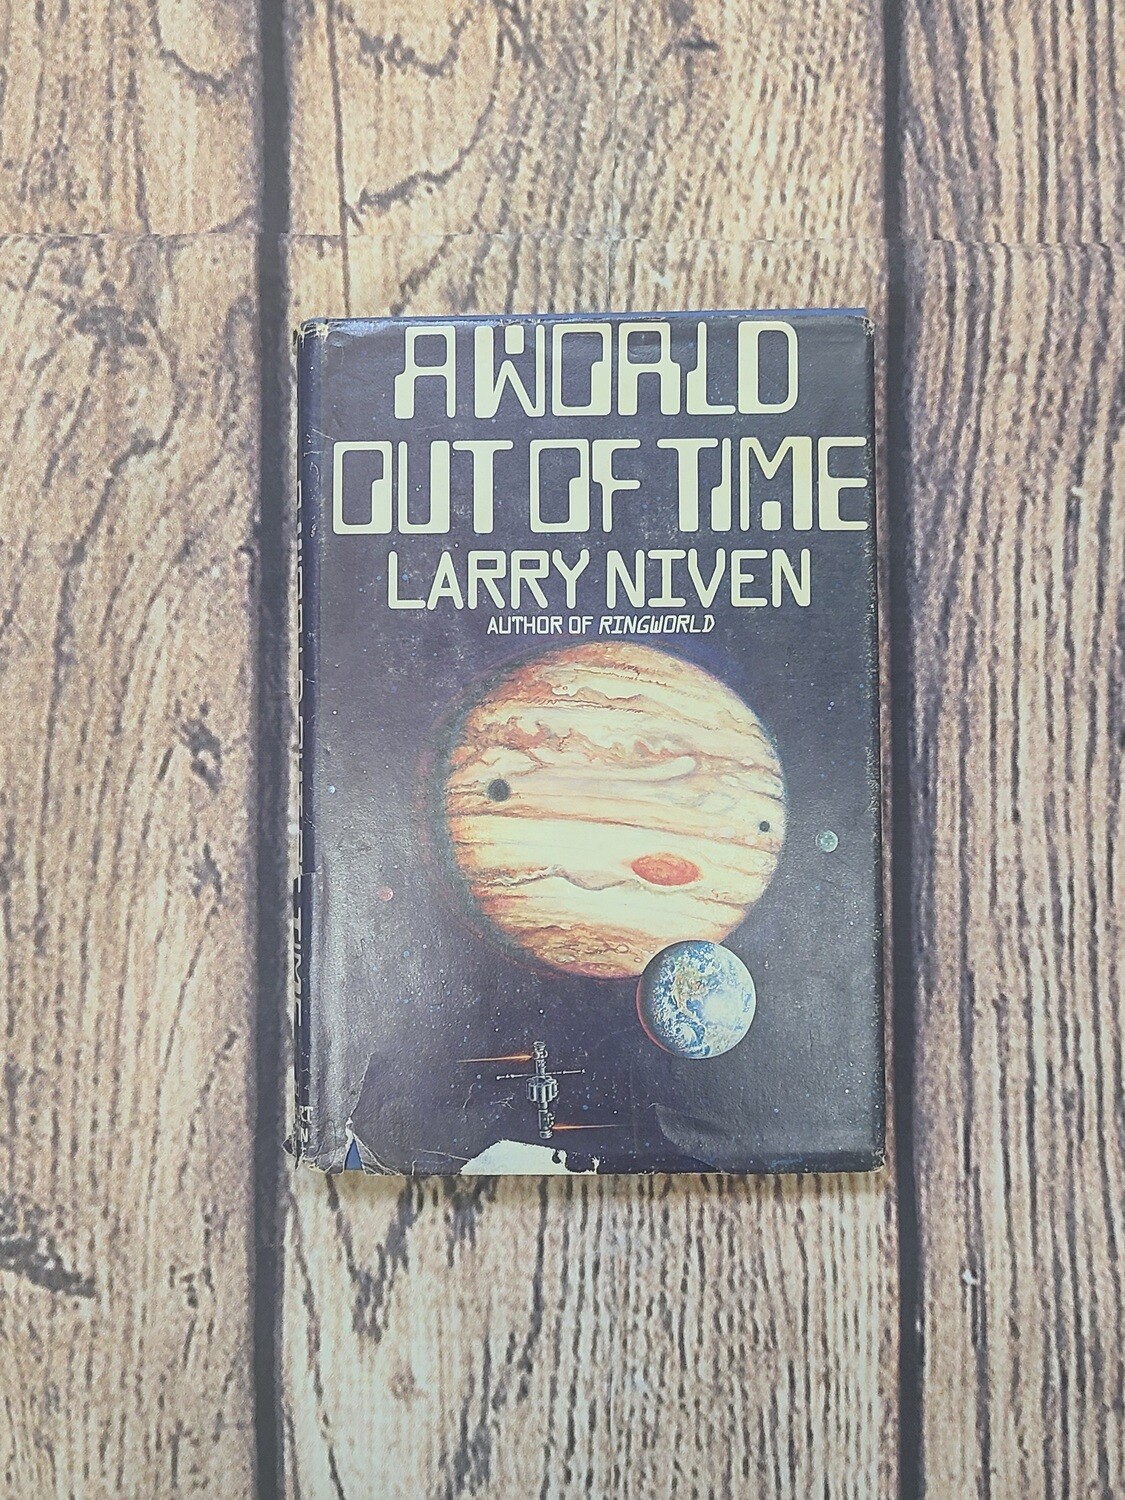 A World Out of Time by Larry Niven